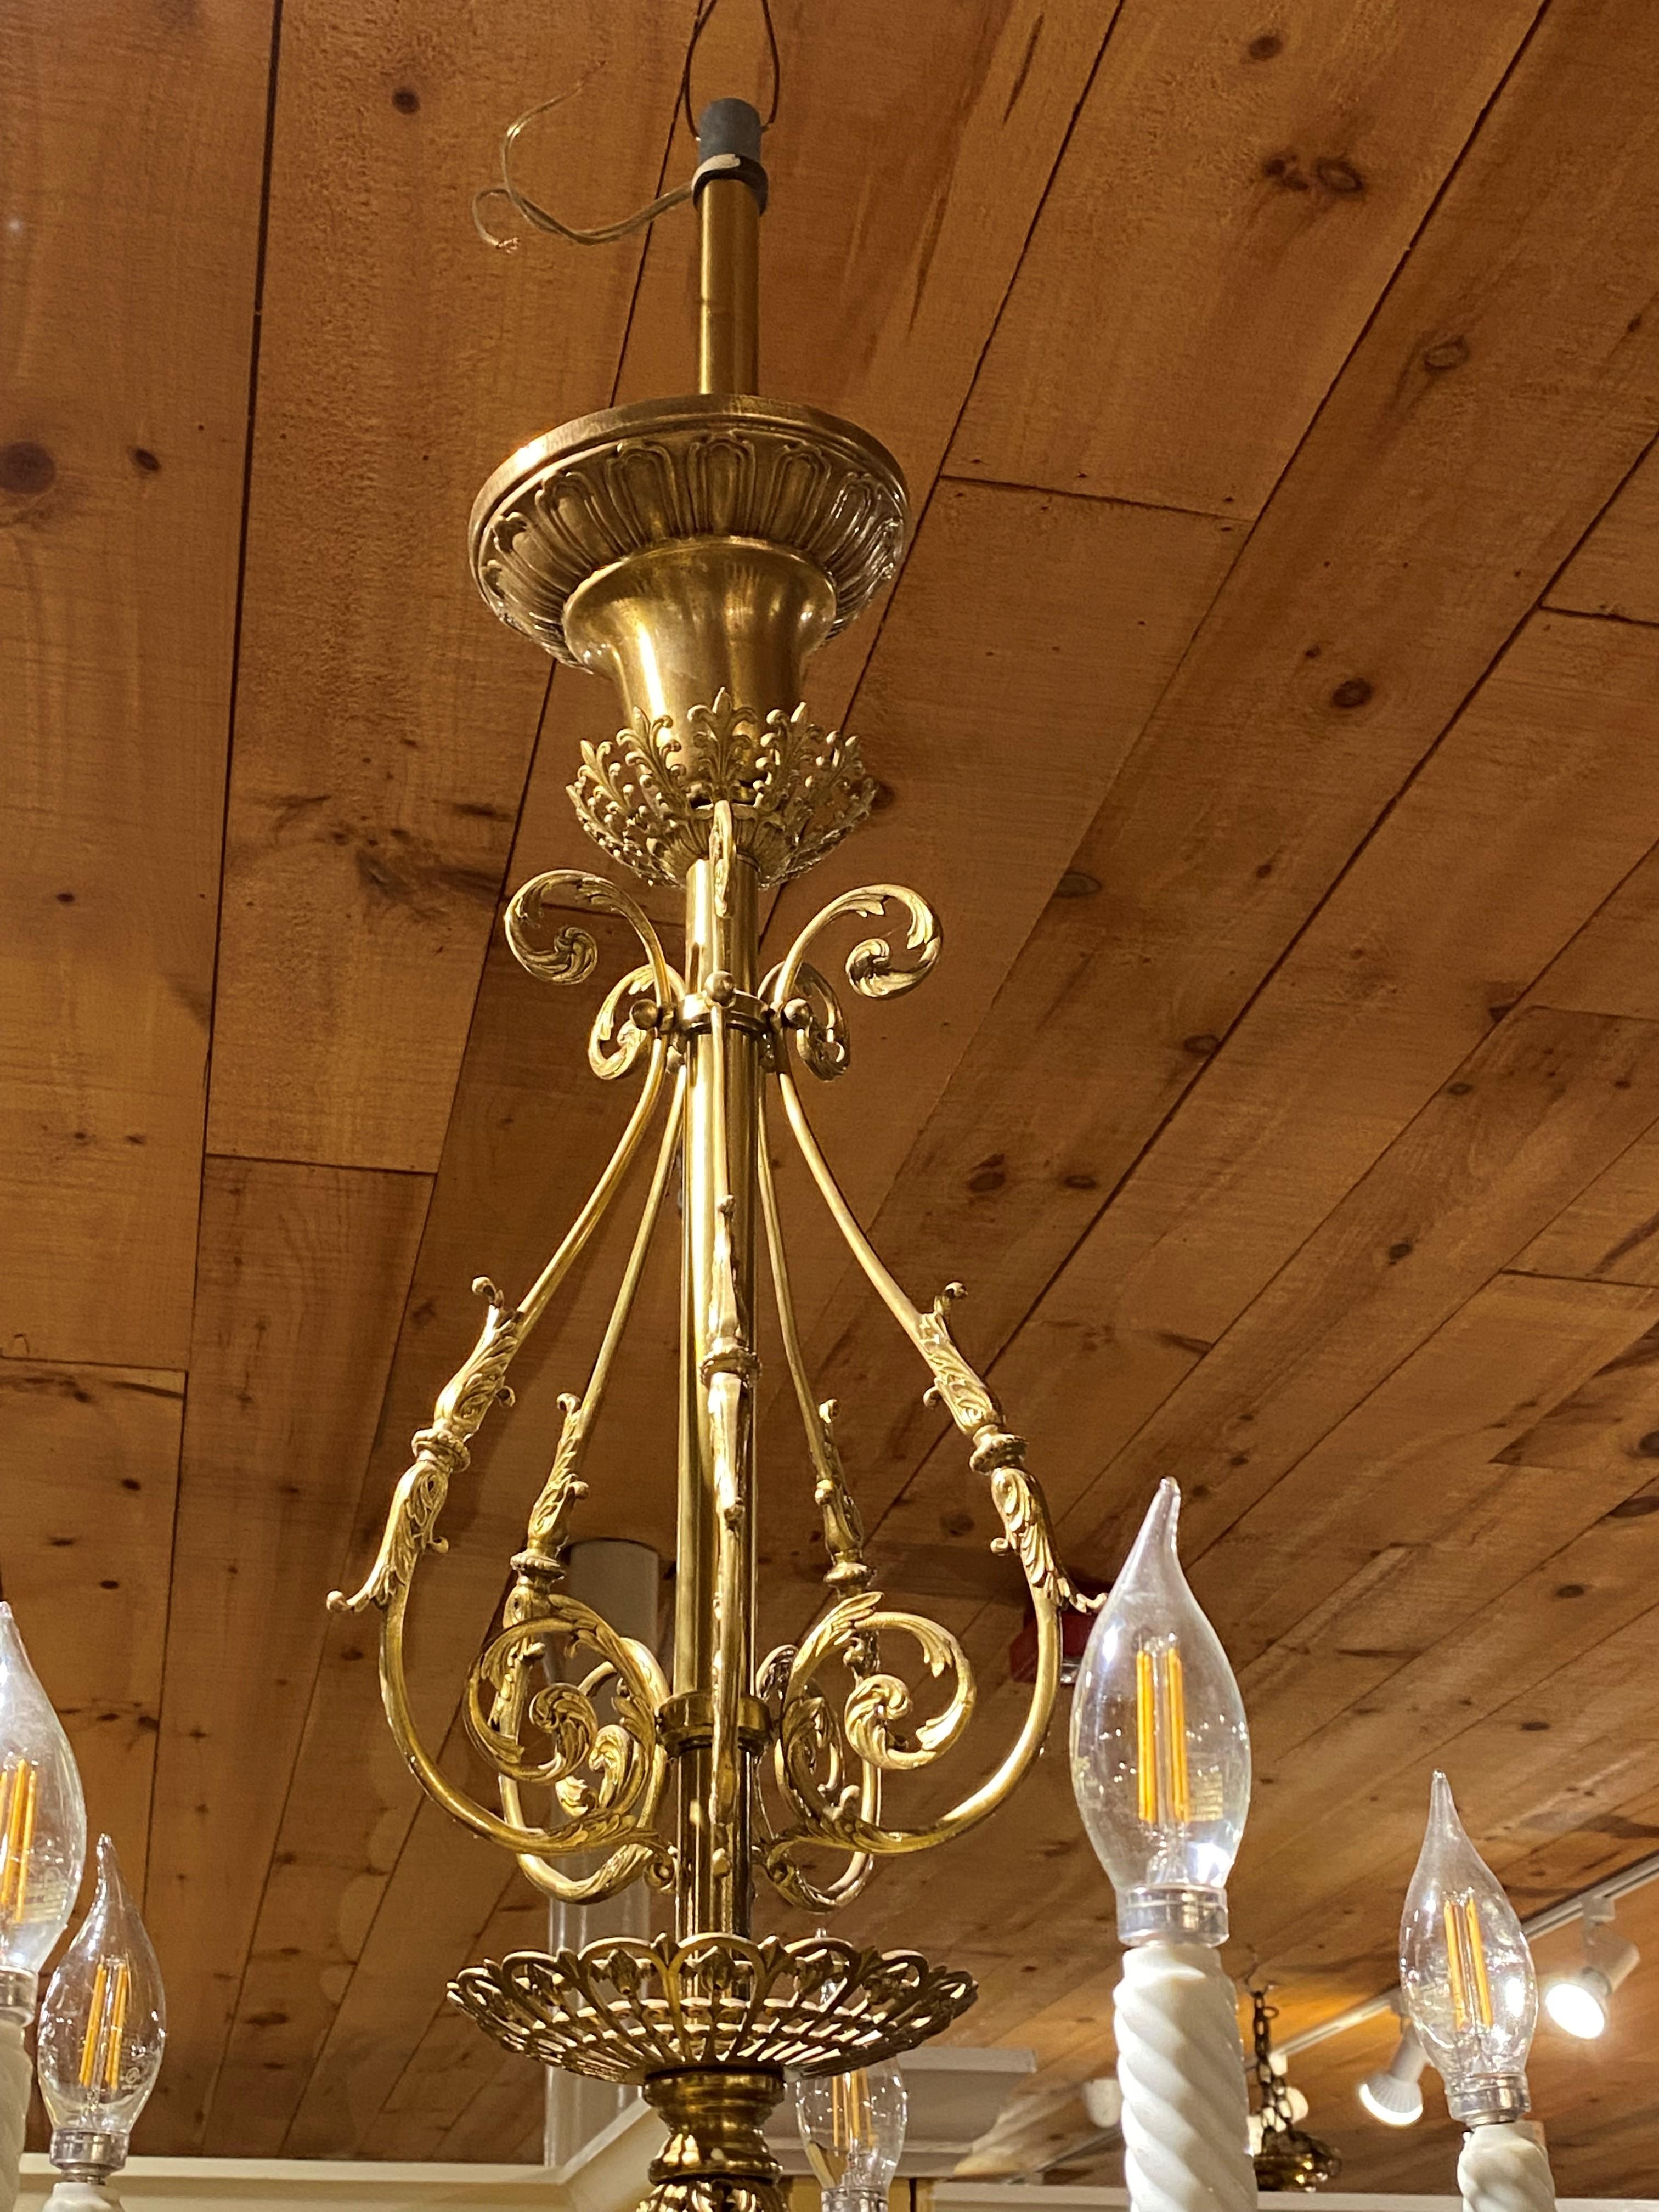 19th Century Fine 10-Light Brass Gasolier / Chandelier Electrified with 5 Etched Shades